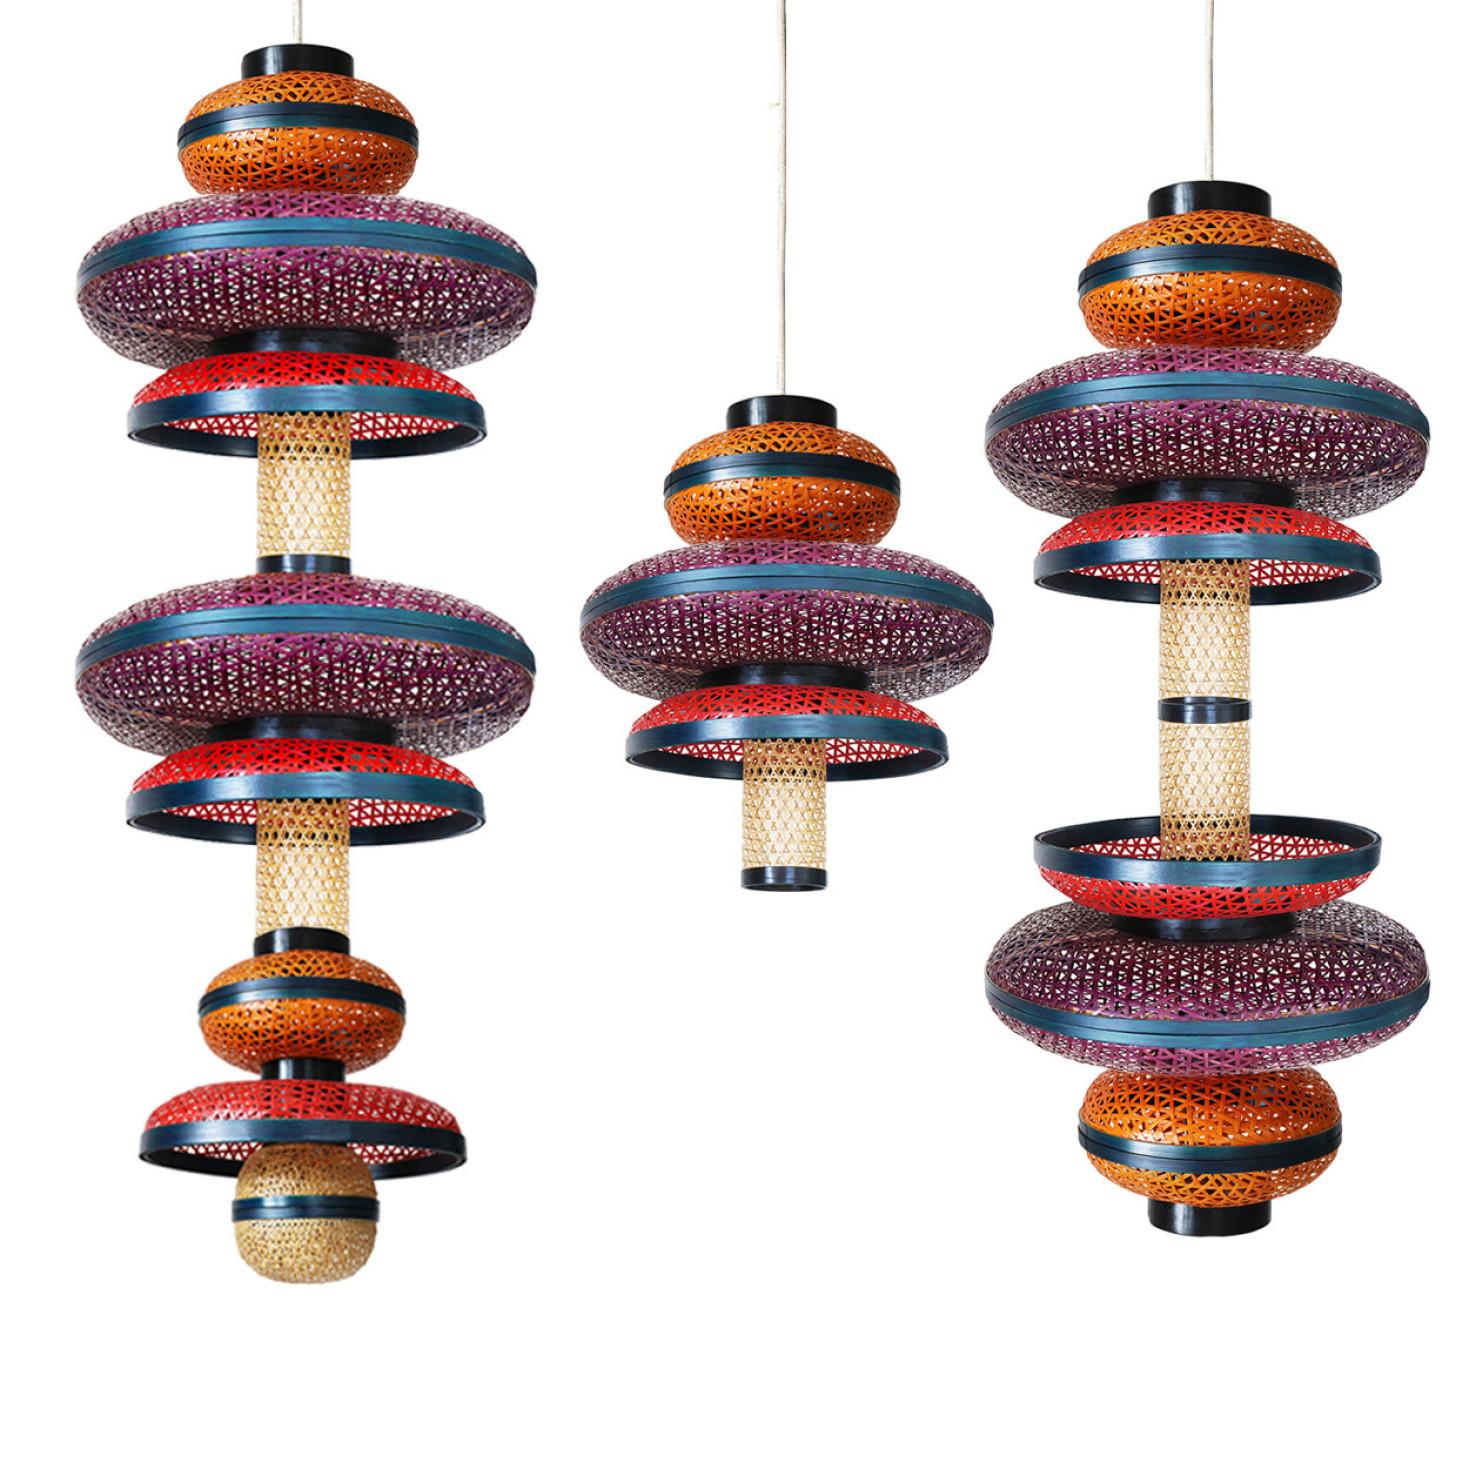 The playful ‘Flower Bamboo Chandelier’ brings traditional and ancient bamboo weaving into the modern interior space, showing the visual identity and functionality of this fascinating material. The modular bamboo woven chandelier is inspired by